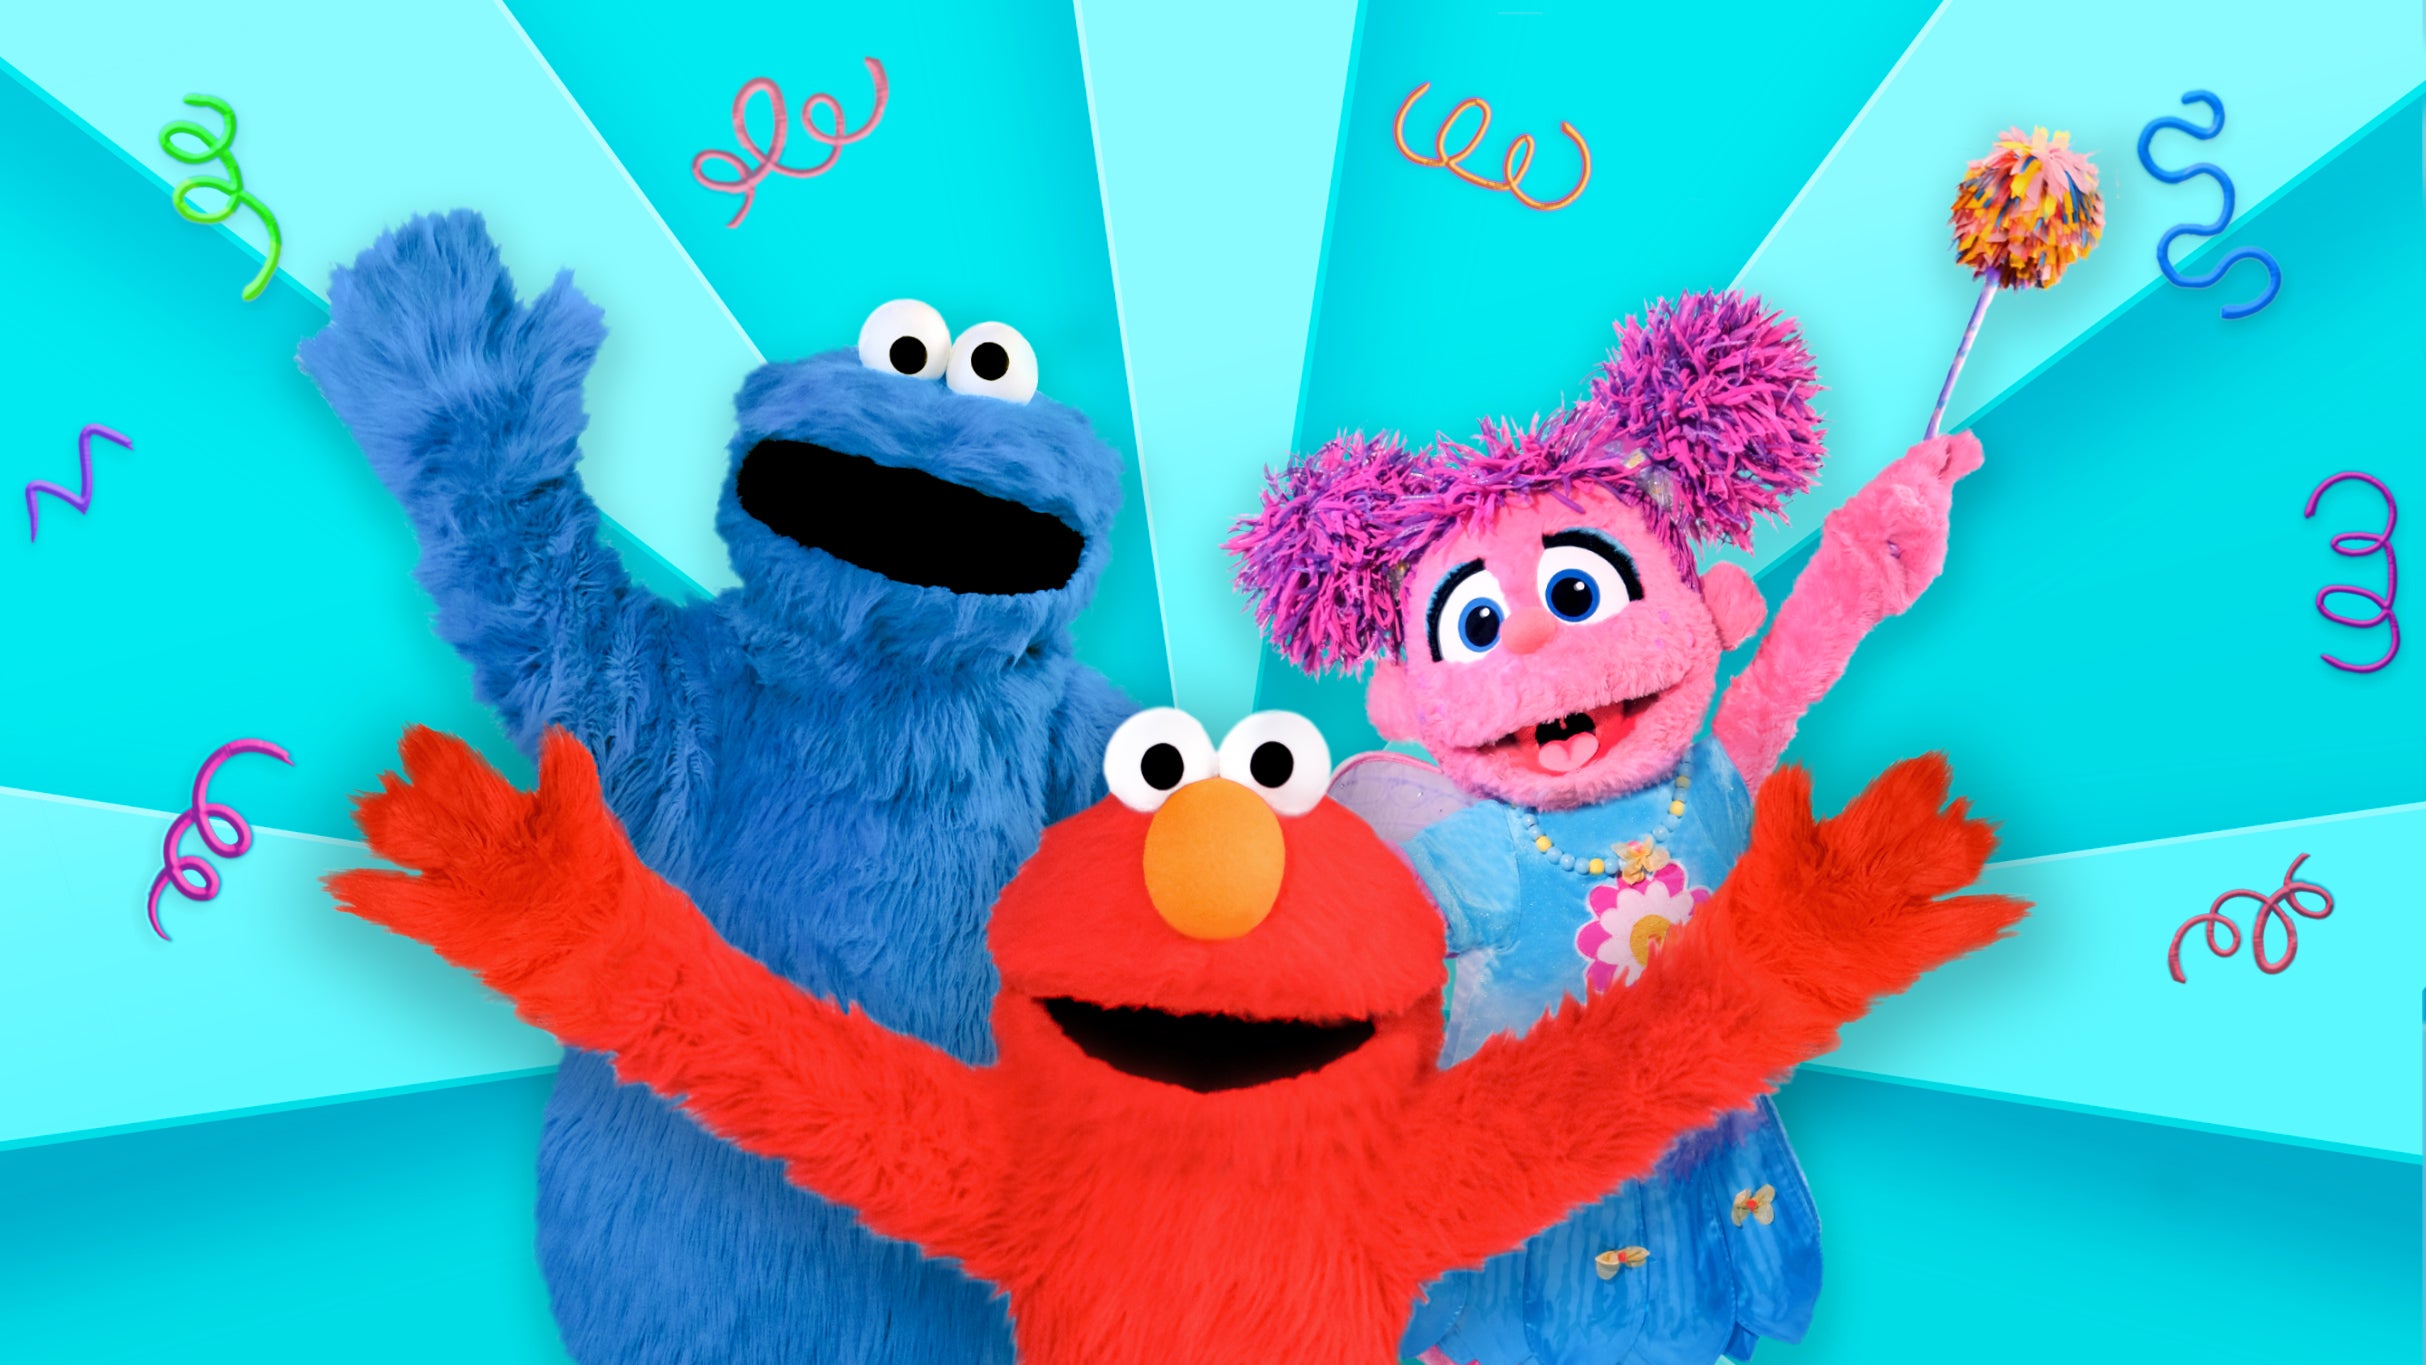 Sesame Street Live! Say Hello free presale code for event tickets in Wallingford, CT (Toyota Oakdale Theatre)